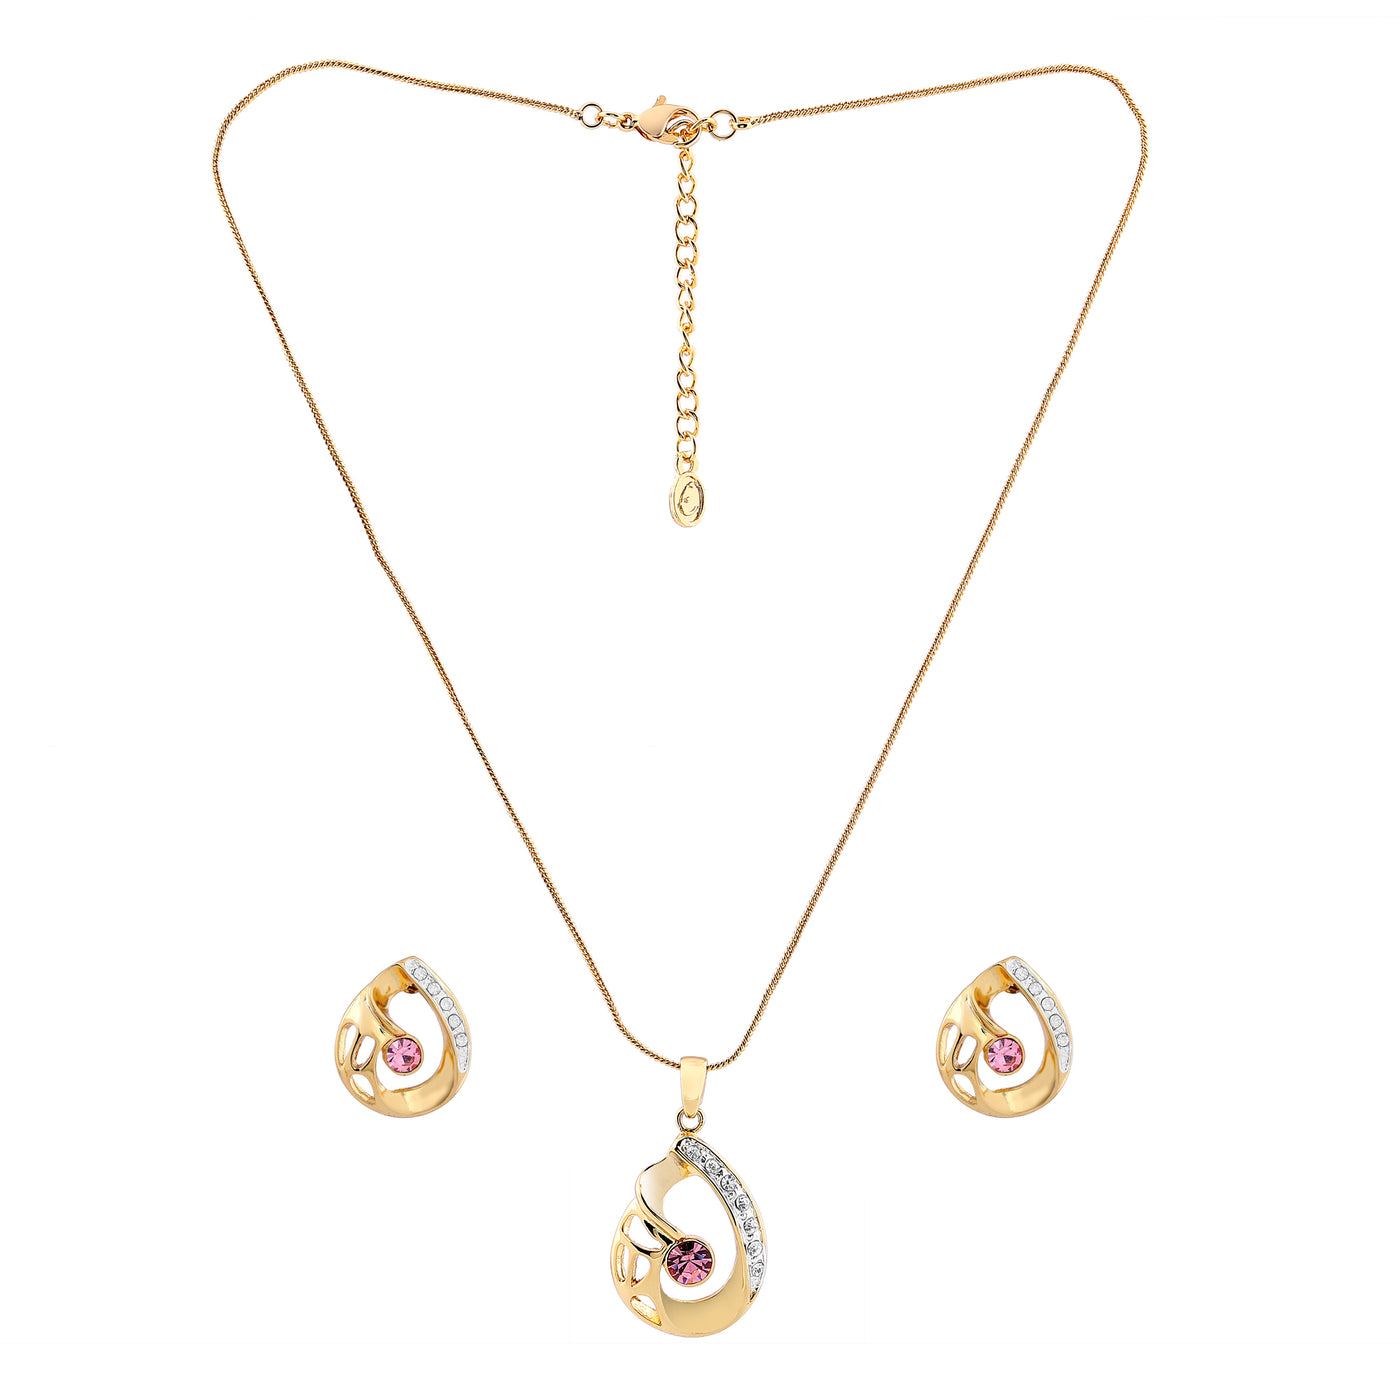 Estele 24 Kt Gold and Silver Plated Loop with Austrain Crystal Necklace Set for Women